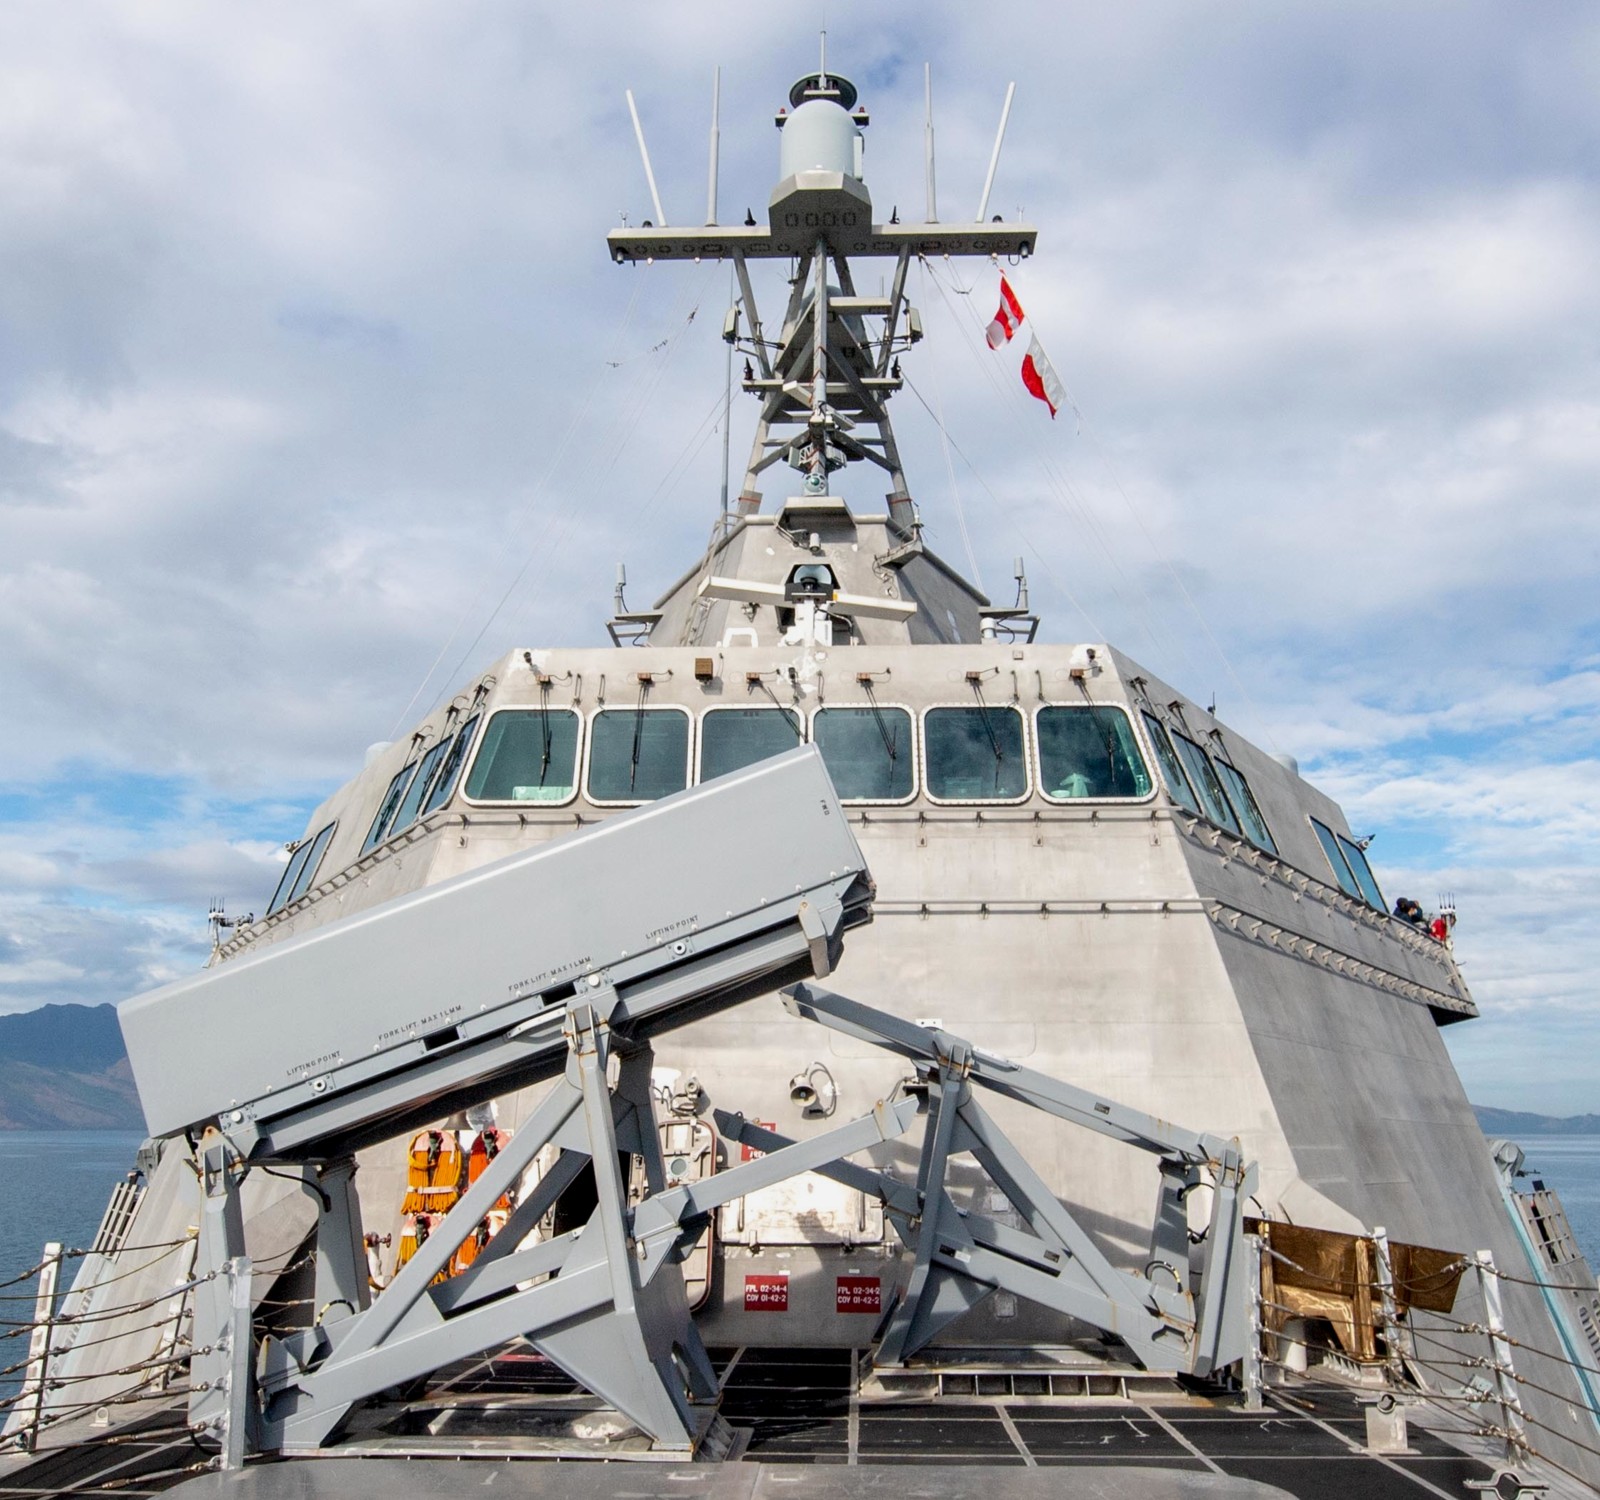 lcs-18 uss charleston independence class littoral combat ship us navy subic bay philippines 66